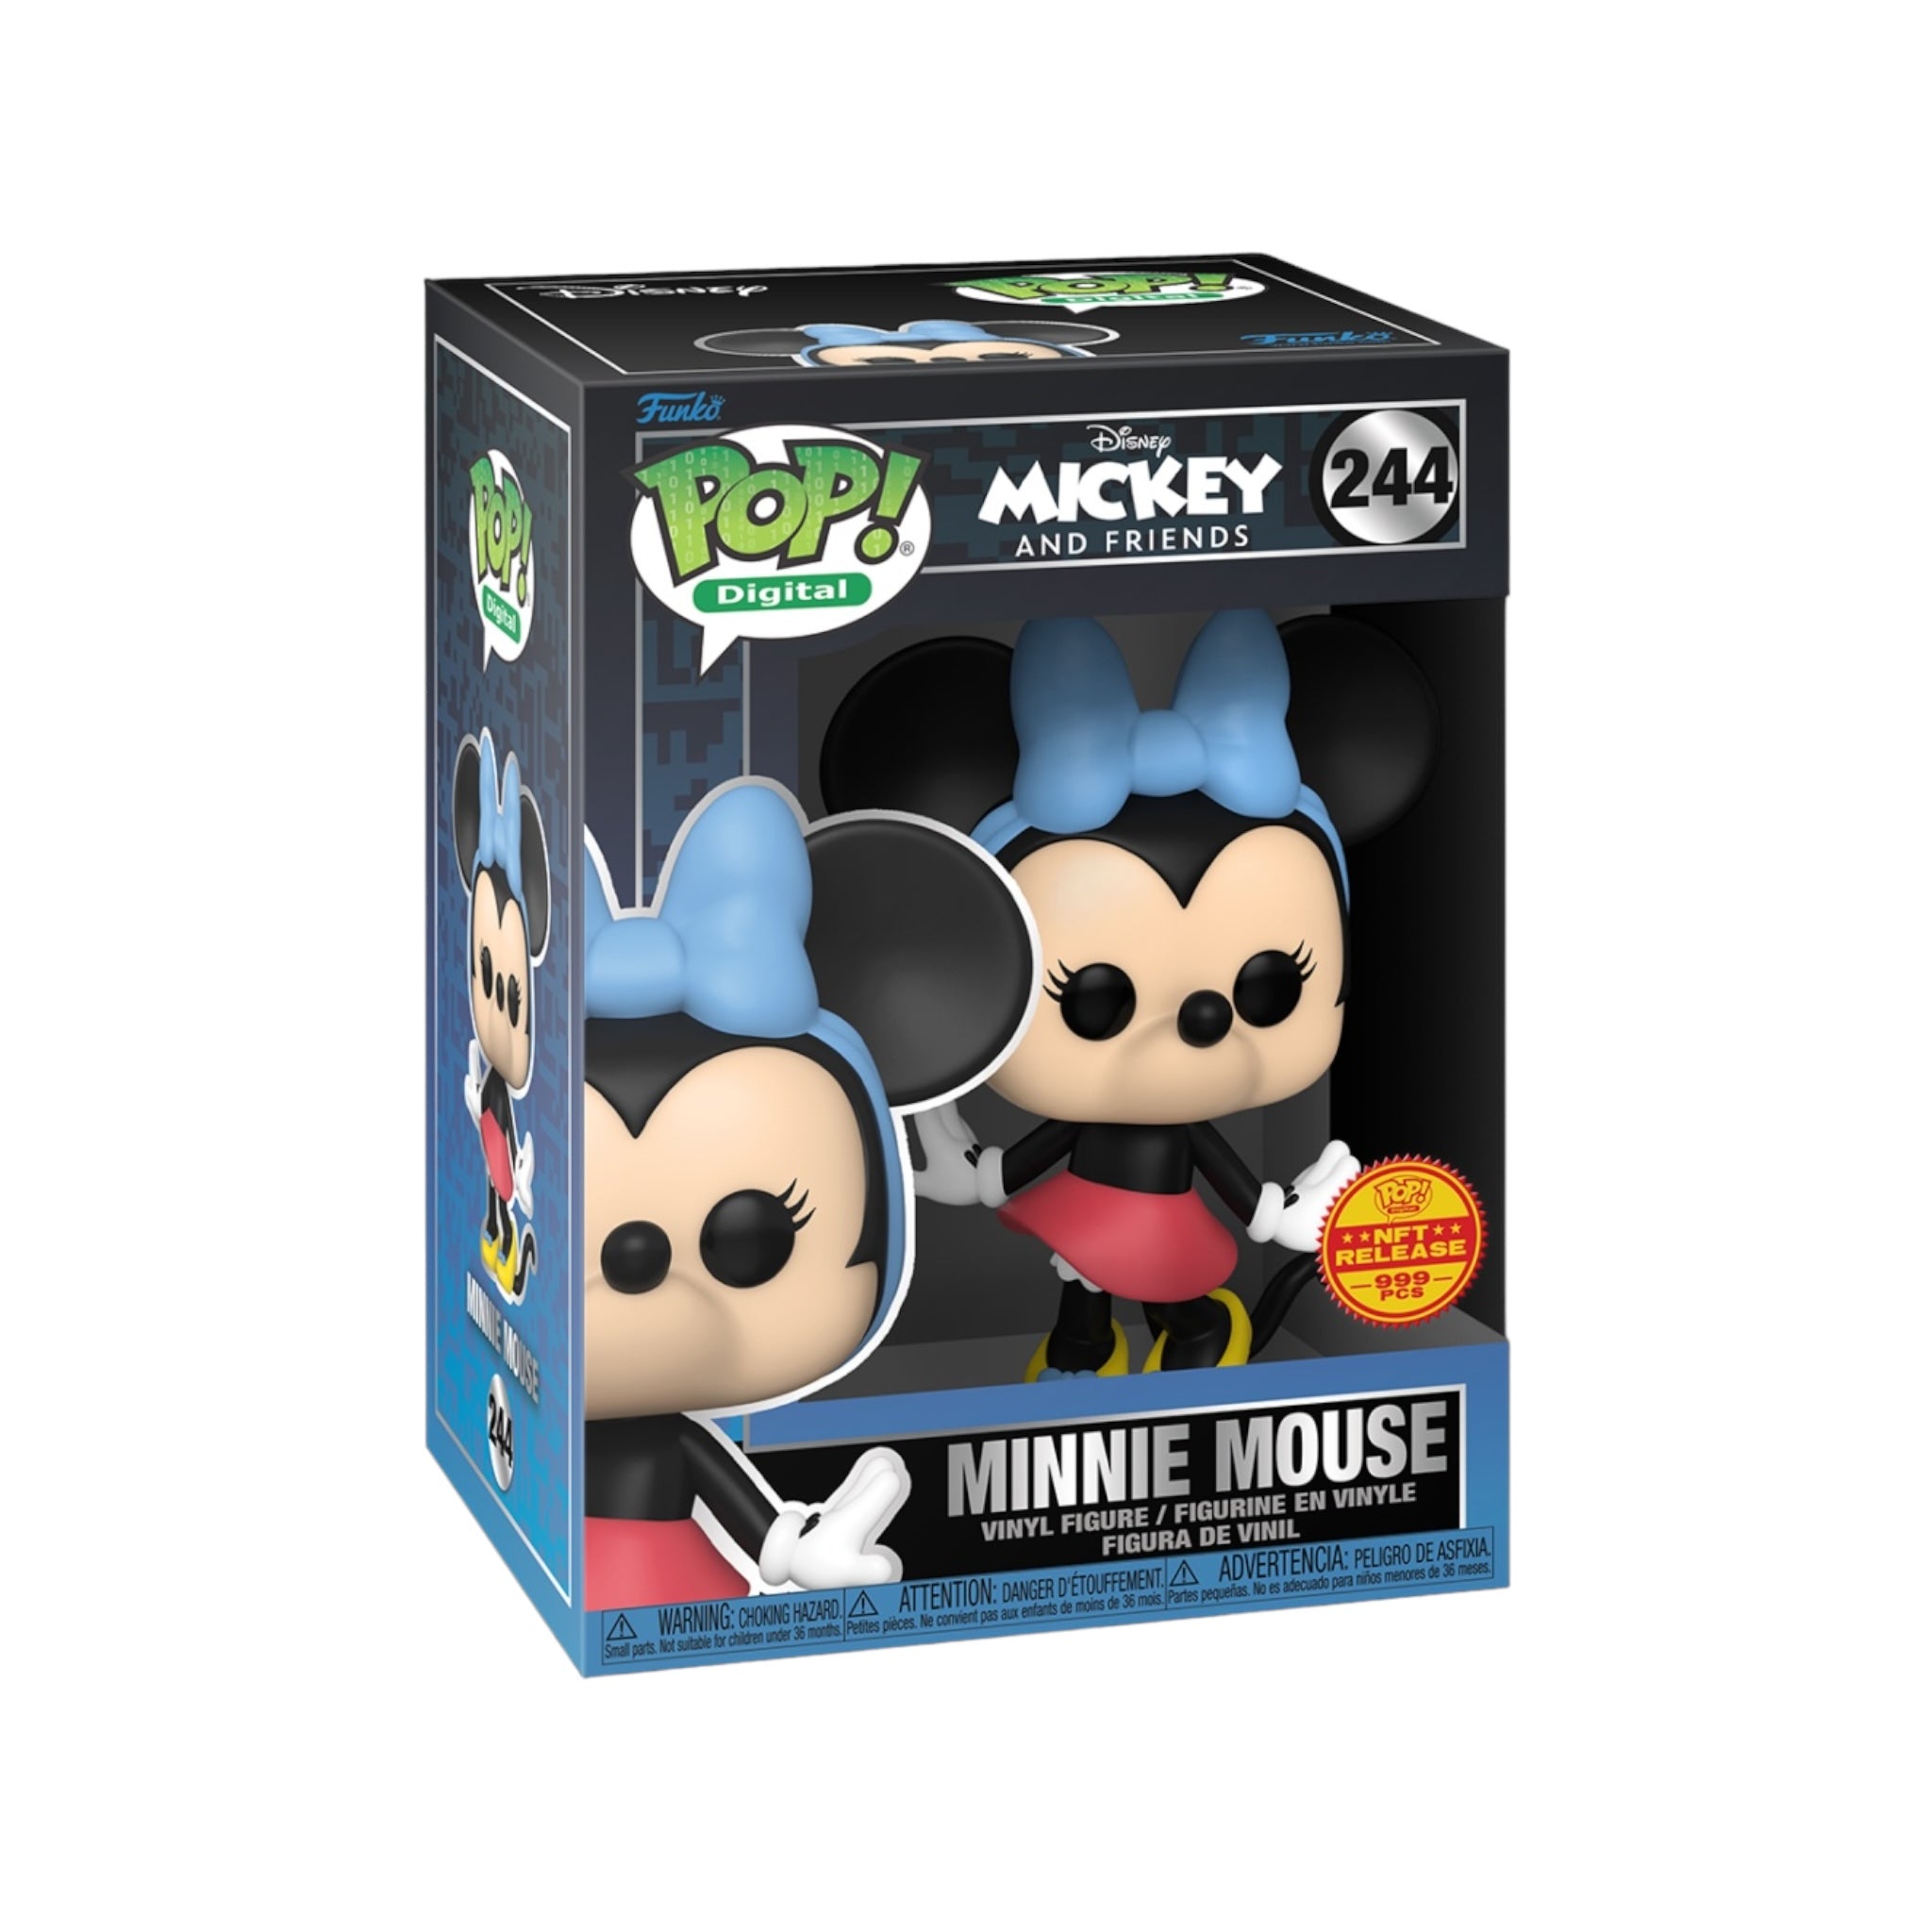 Minnie Mouse #244 Funko Pop! - Mickey and Friends - NFT Release Exclusive LE999 Pcs